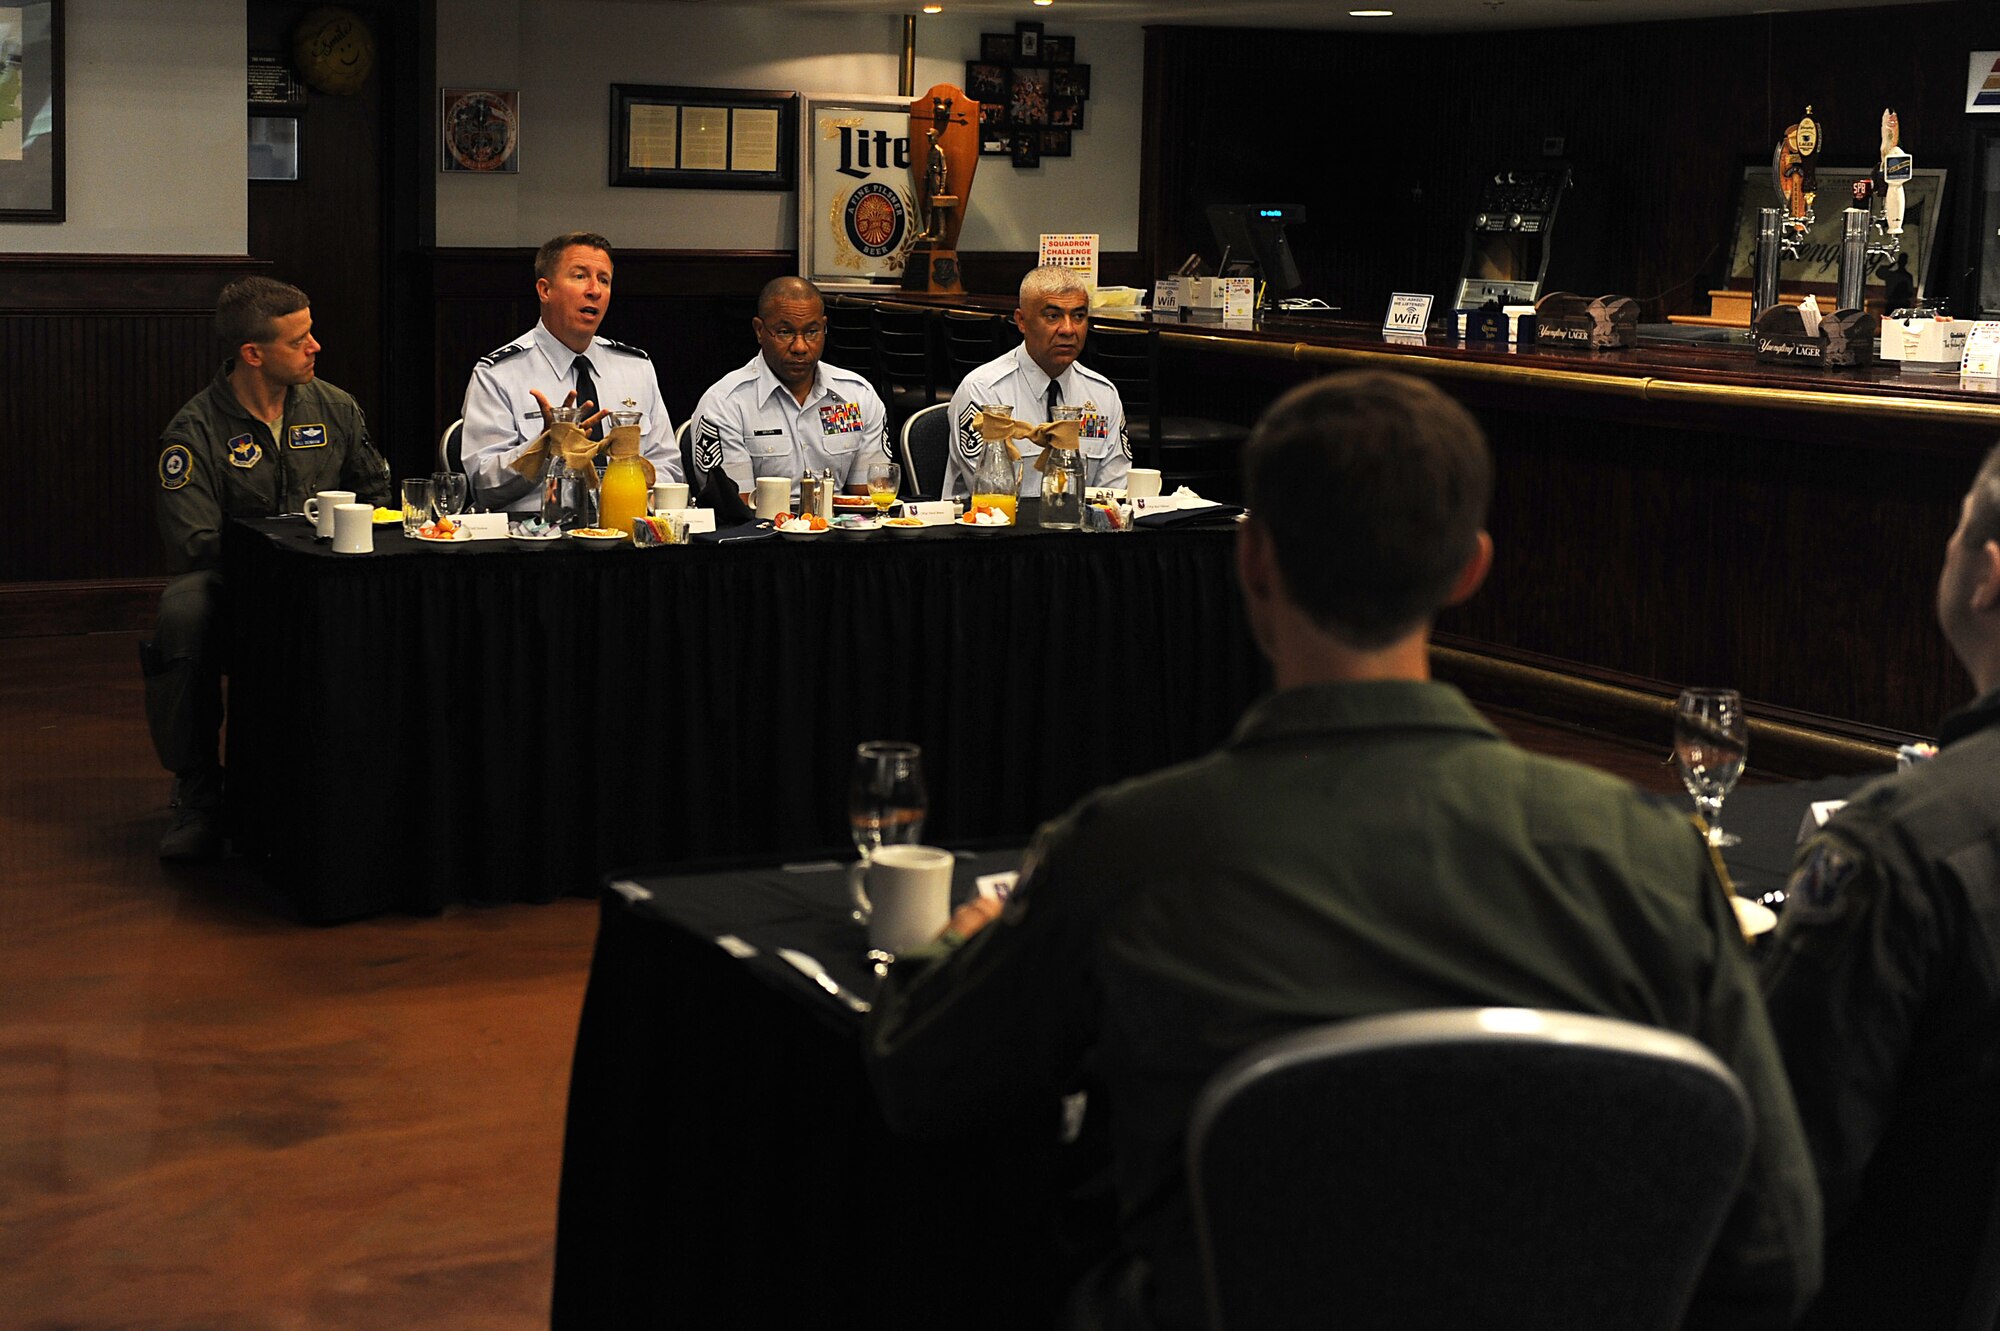 U.S. Air Force Maj. Gen. Patrick Doherty, 19th Air Force commander, talks to 14th Flying Training Wing squadron commanders at Columbus Air Force Base, Mississippi Aug. 6, 2018. Doherty discussed the reformation of the 19th Air Force staff and how that will positively affect members at the squadron levels. (U.S. Air Force photo by Airman 1st Class Beaux Hebert)